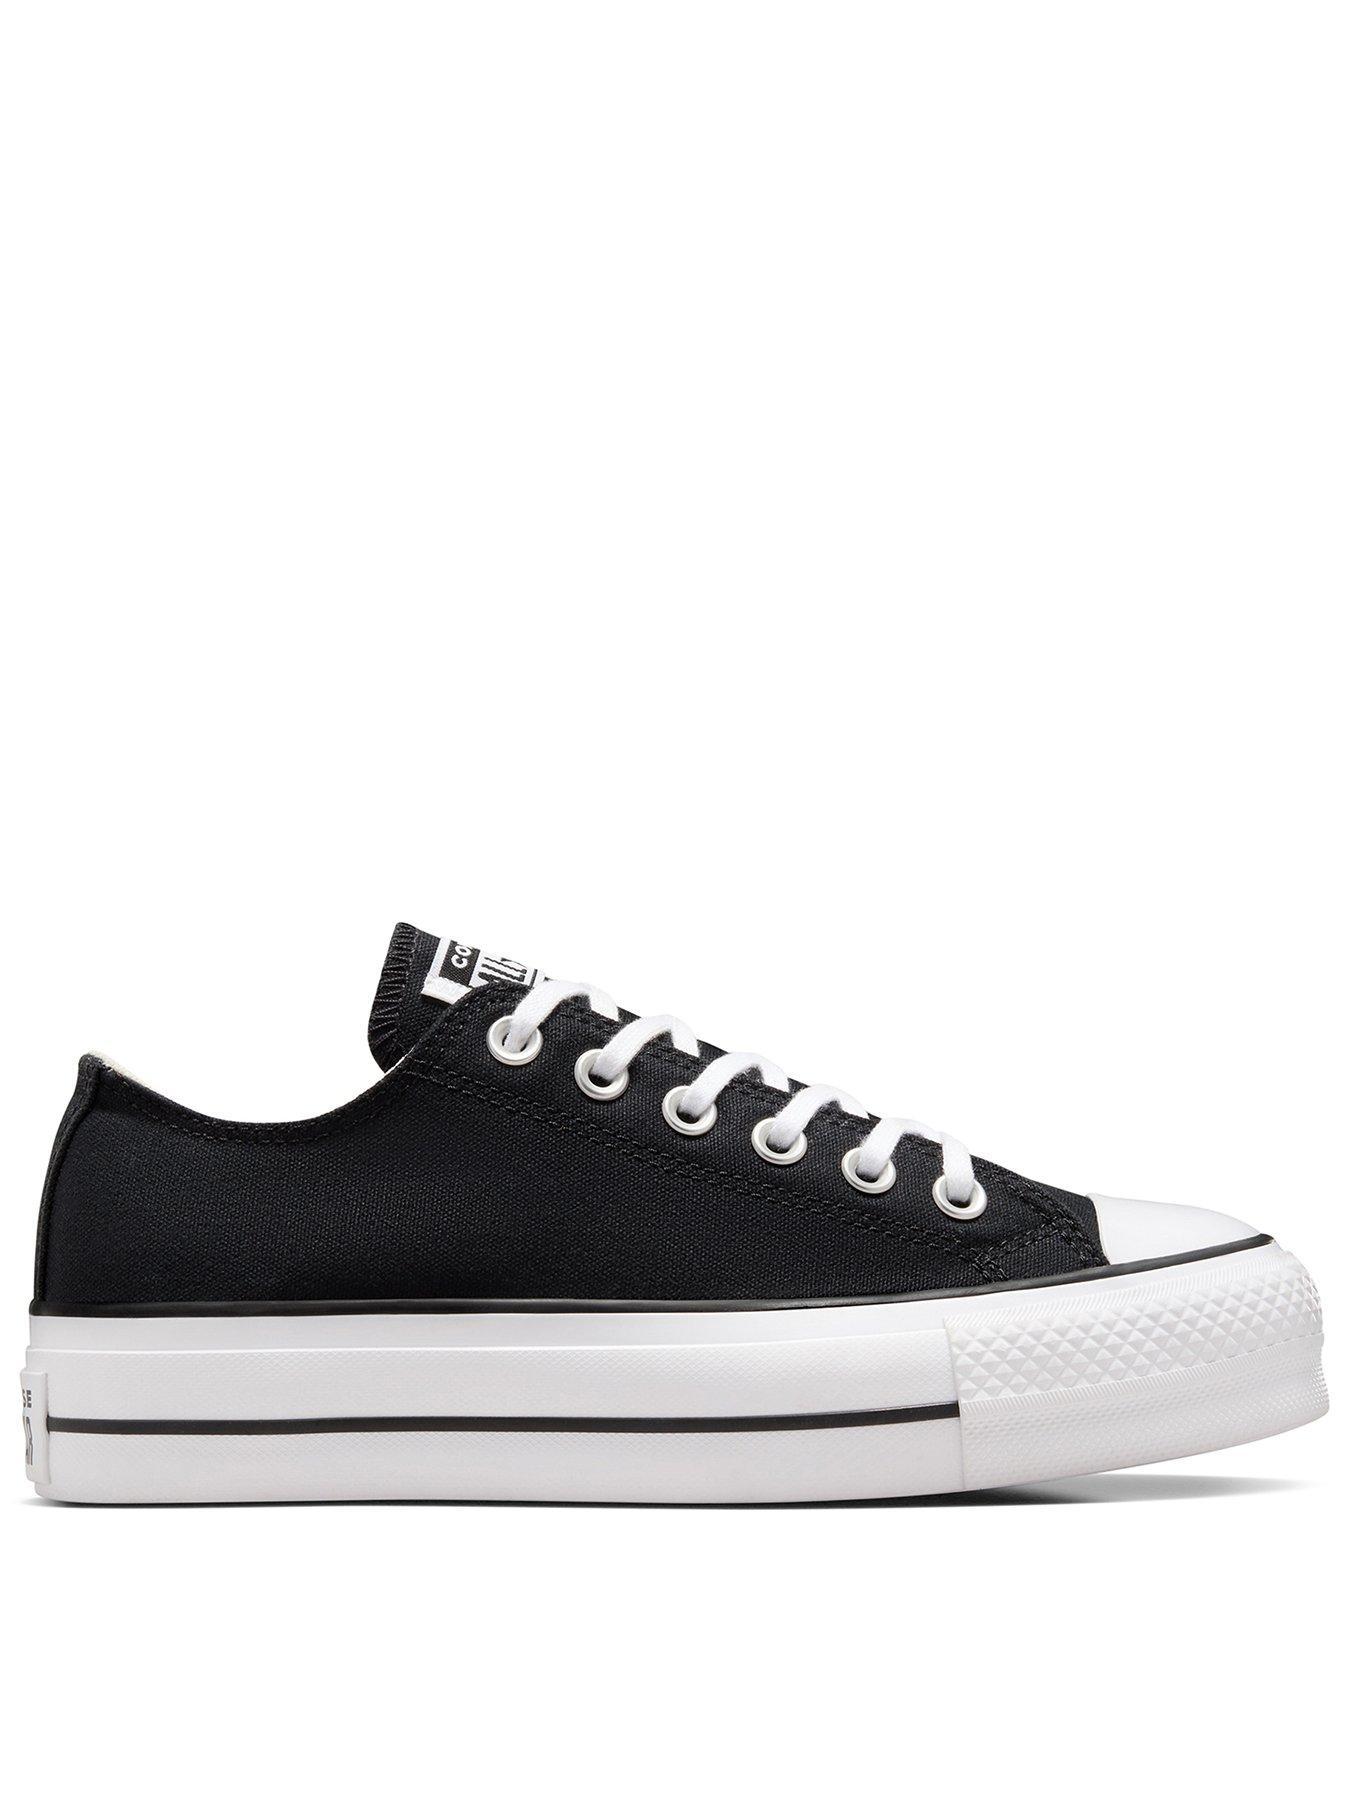 Converse Womens Lift Wide Foundation Ox Trainers - Black/Black, Black/Black, Size 8, Women